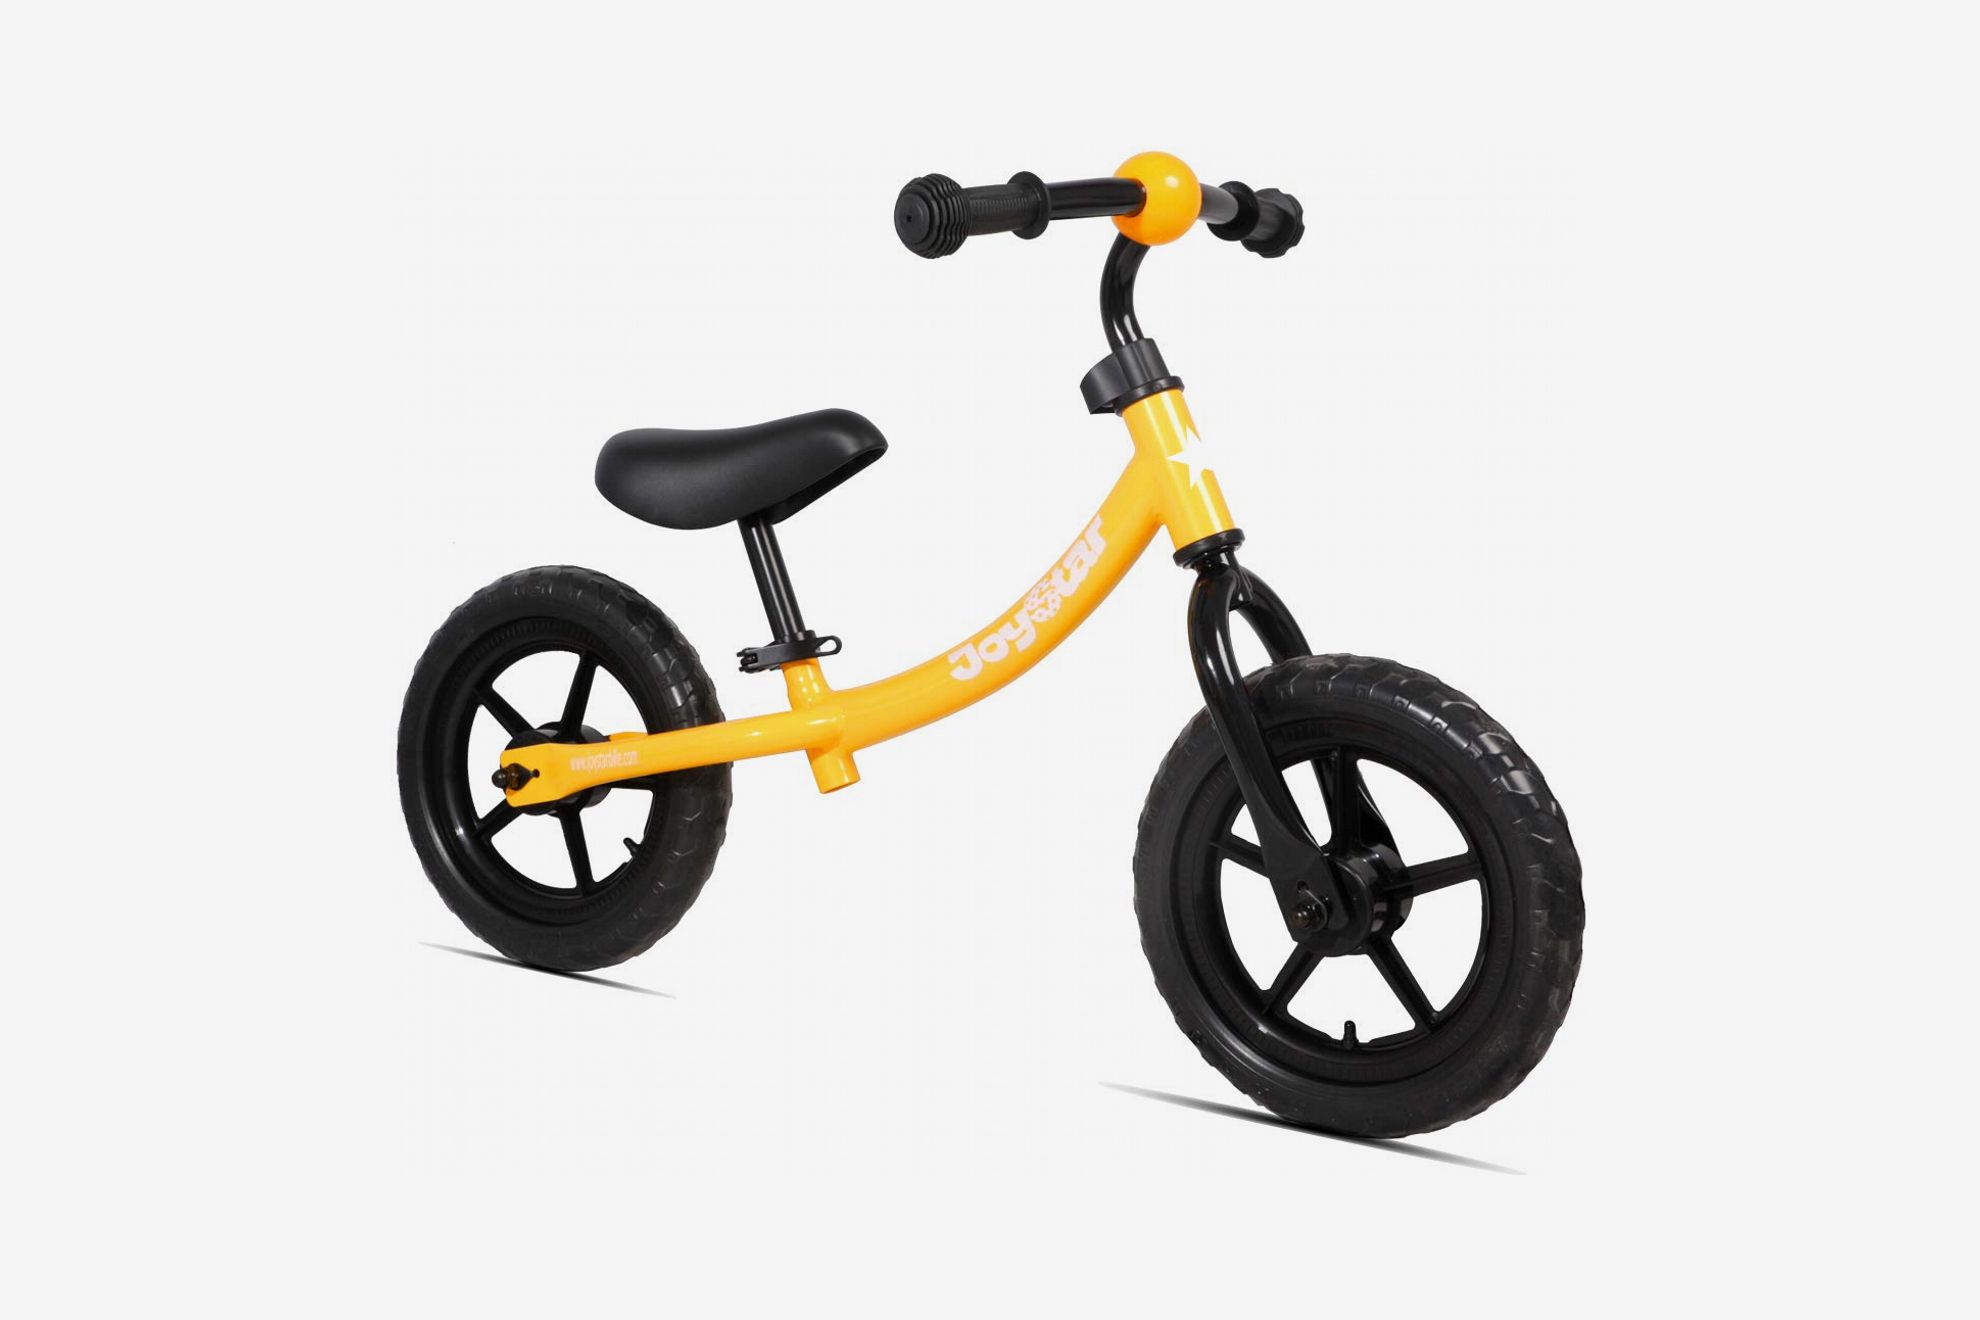 noknow Kids Balance Bike for Boys & Girls 3-8 Years Old with Adjustable Seat Height Airless Tire Lightweight Frame 